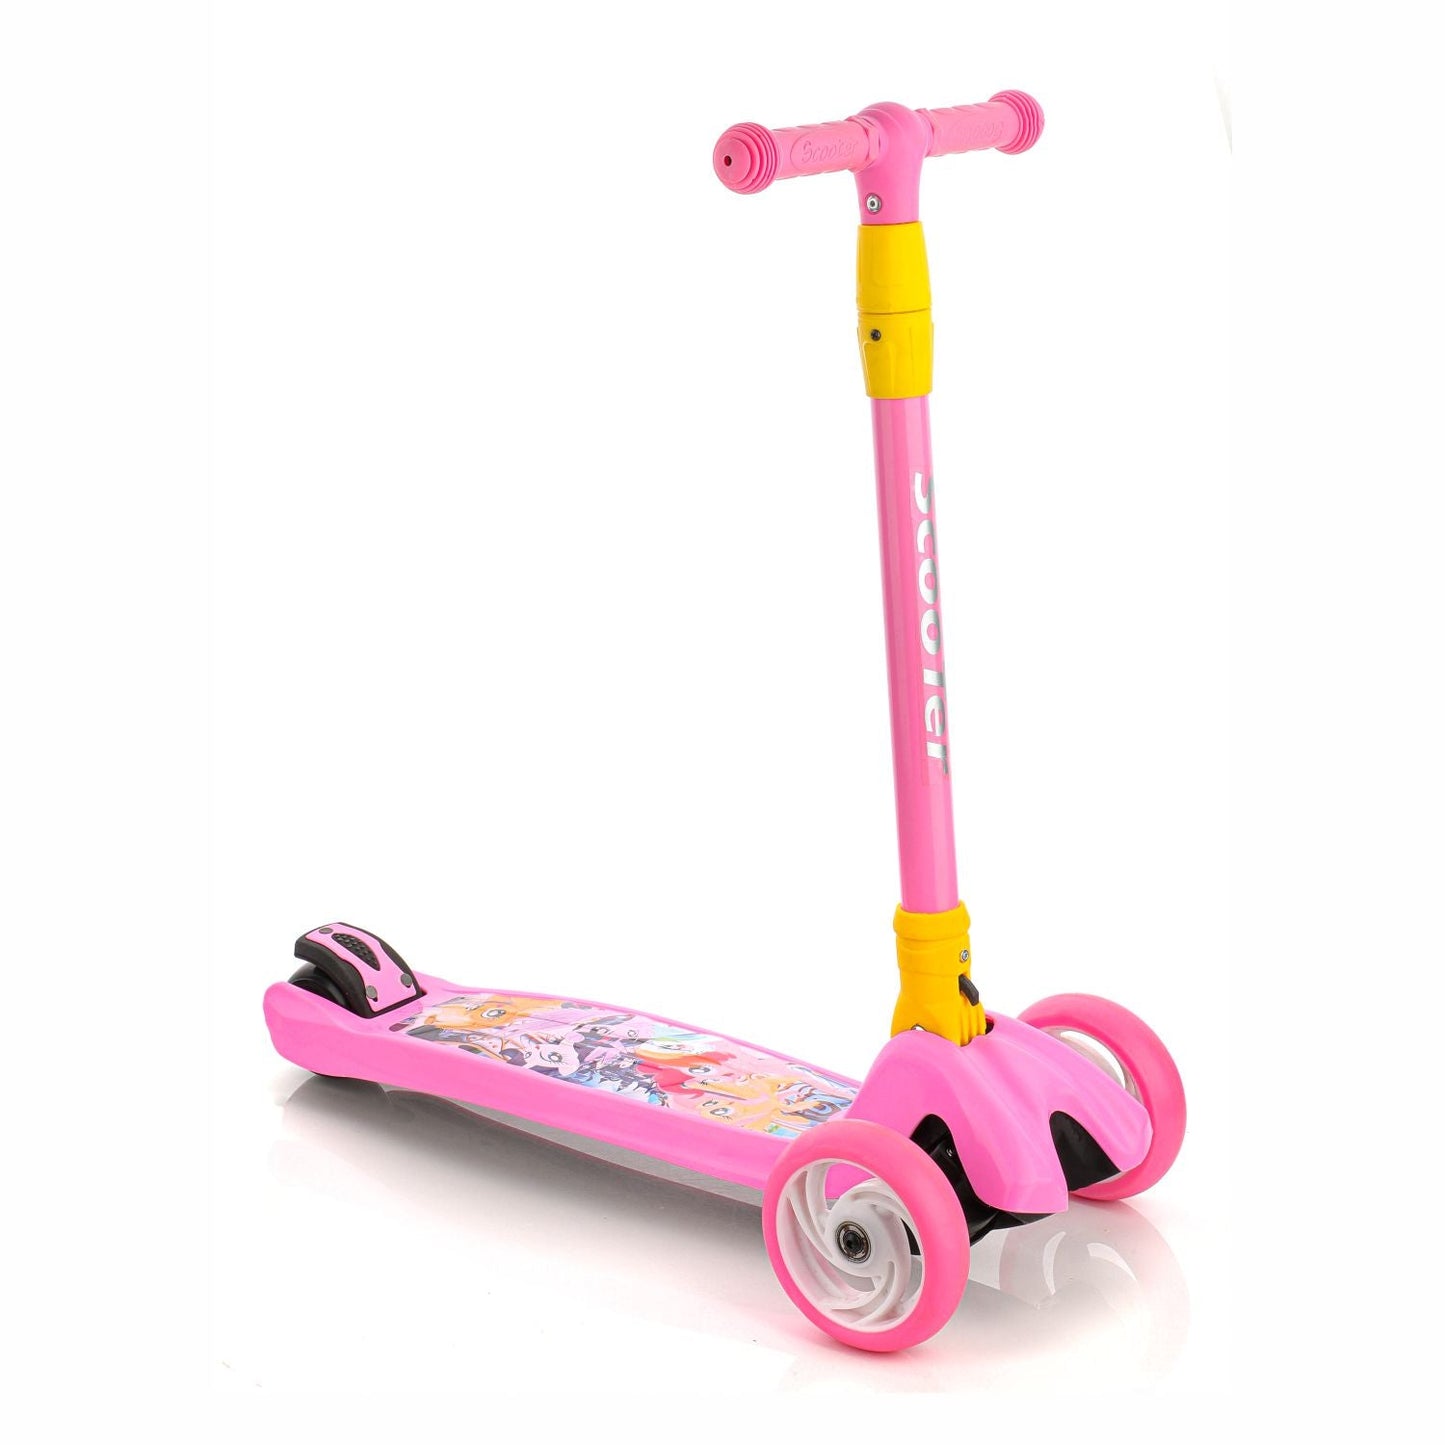 Chanak Premium Kick Scooter for kids Glider Toddler Scooter